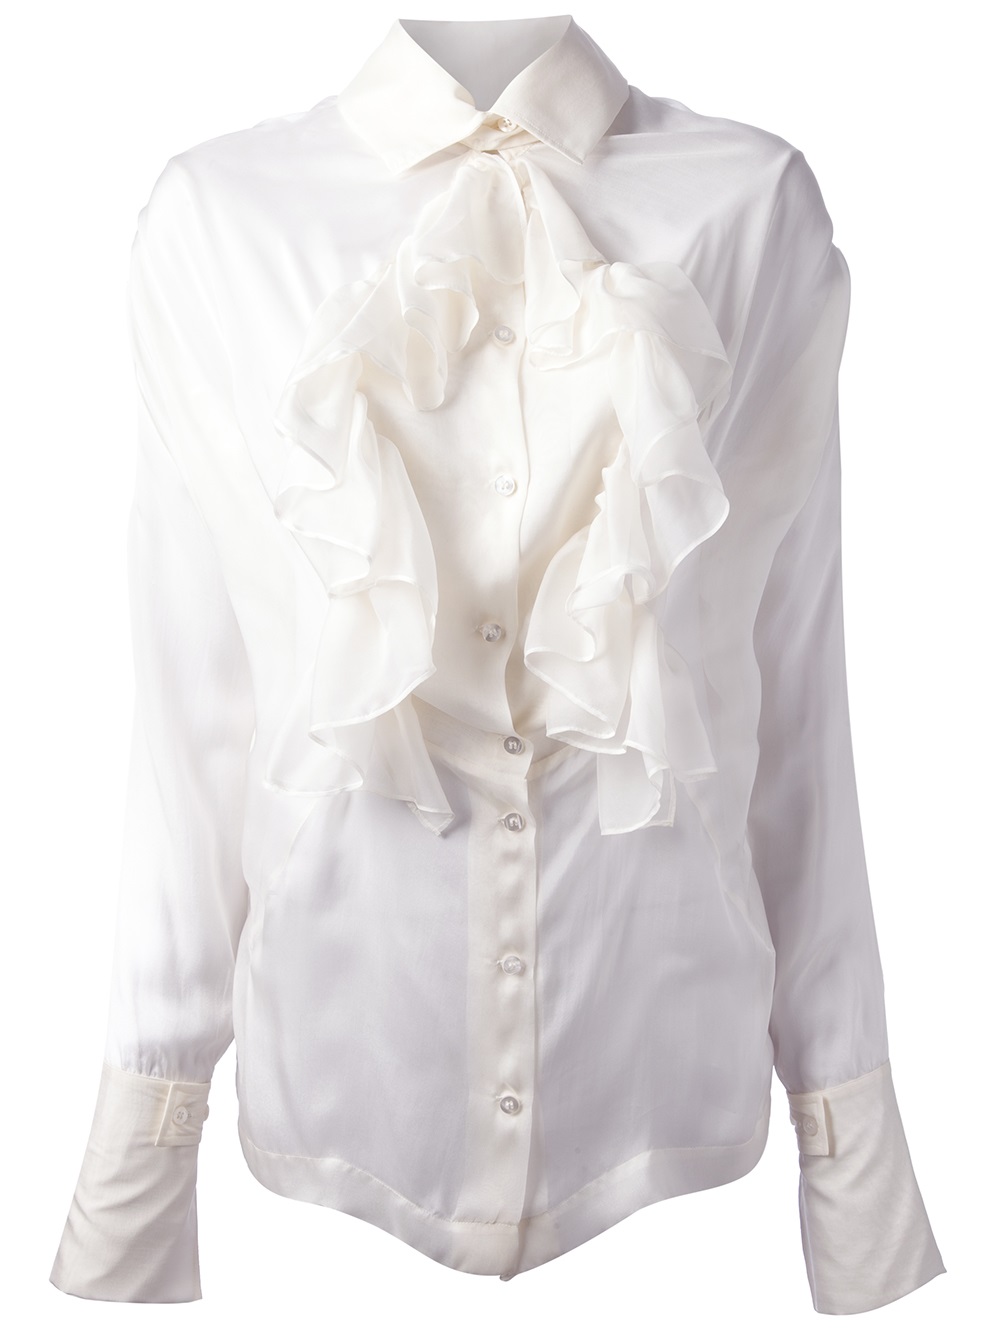 Vivienne westwood red label Transparent Ruffle Blouse in White | Lyst